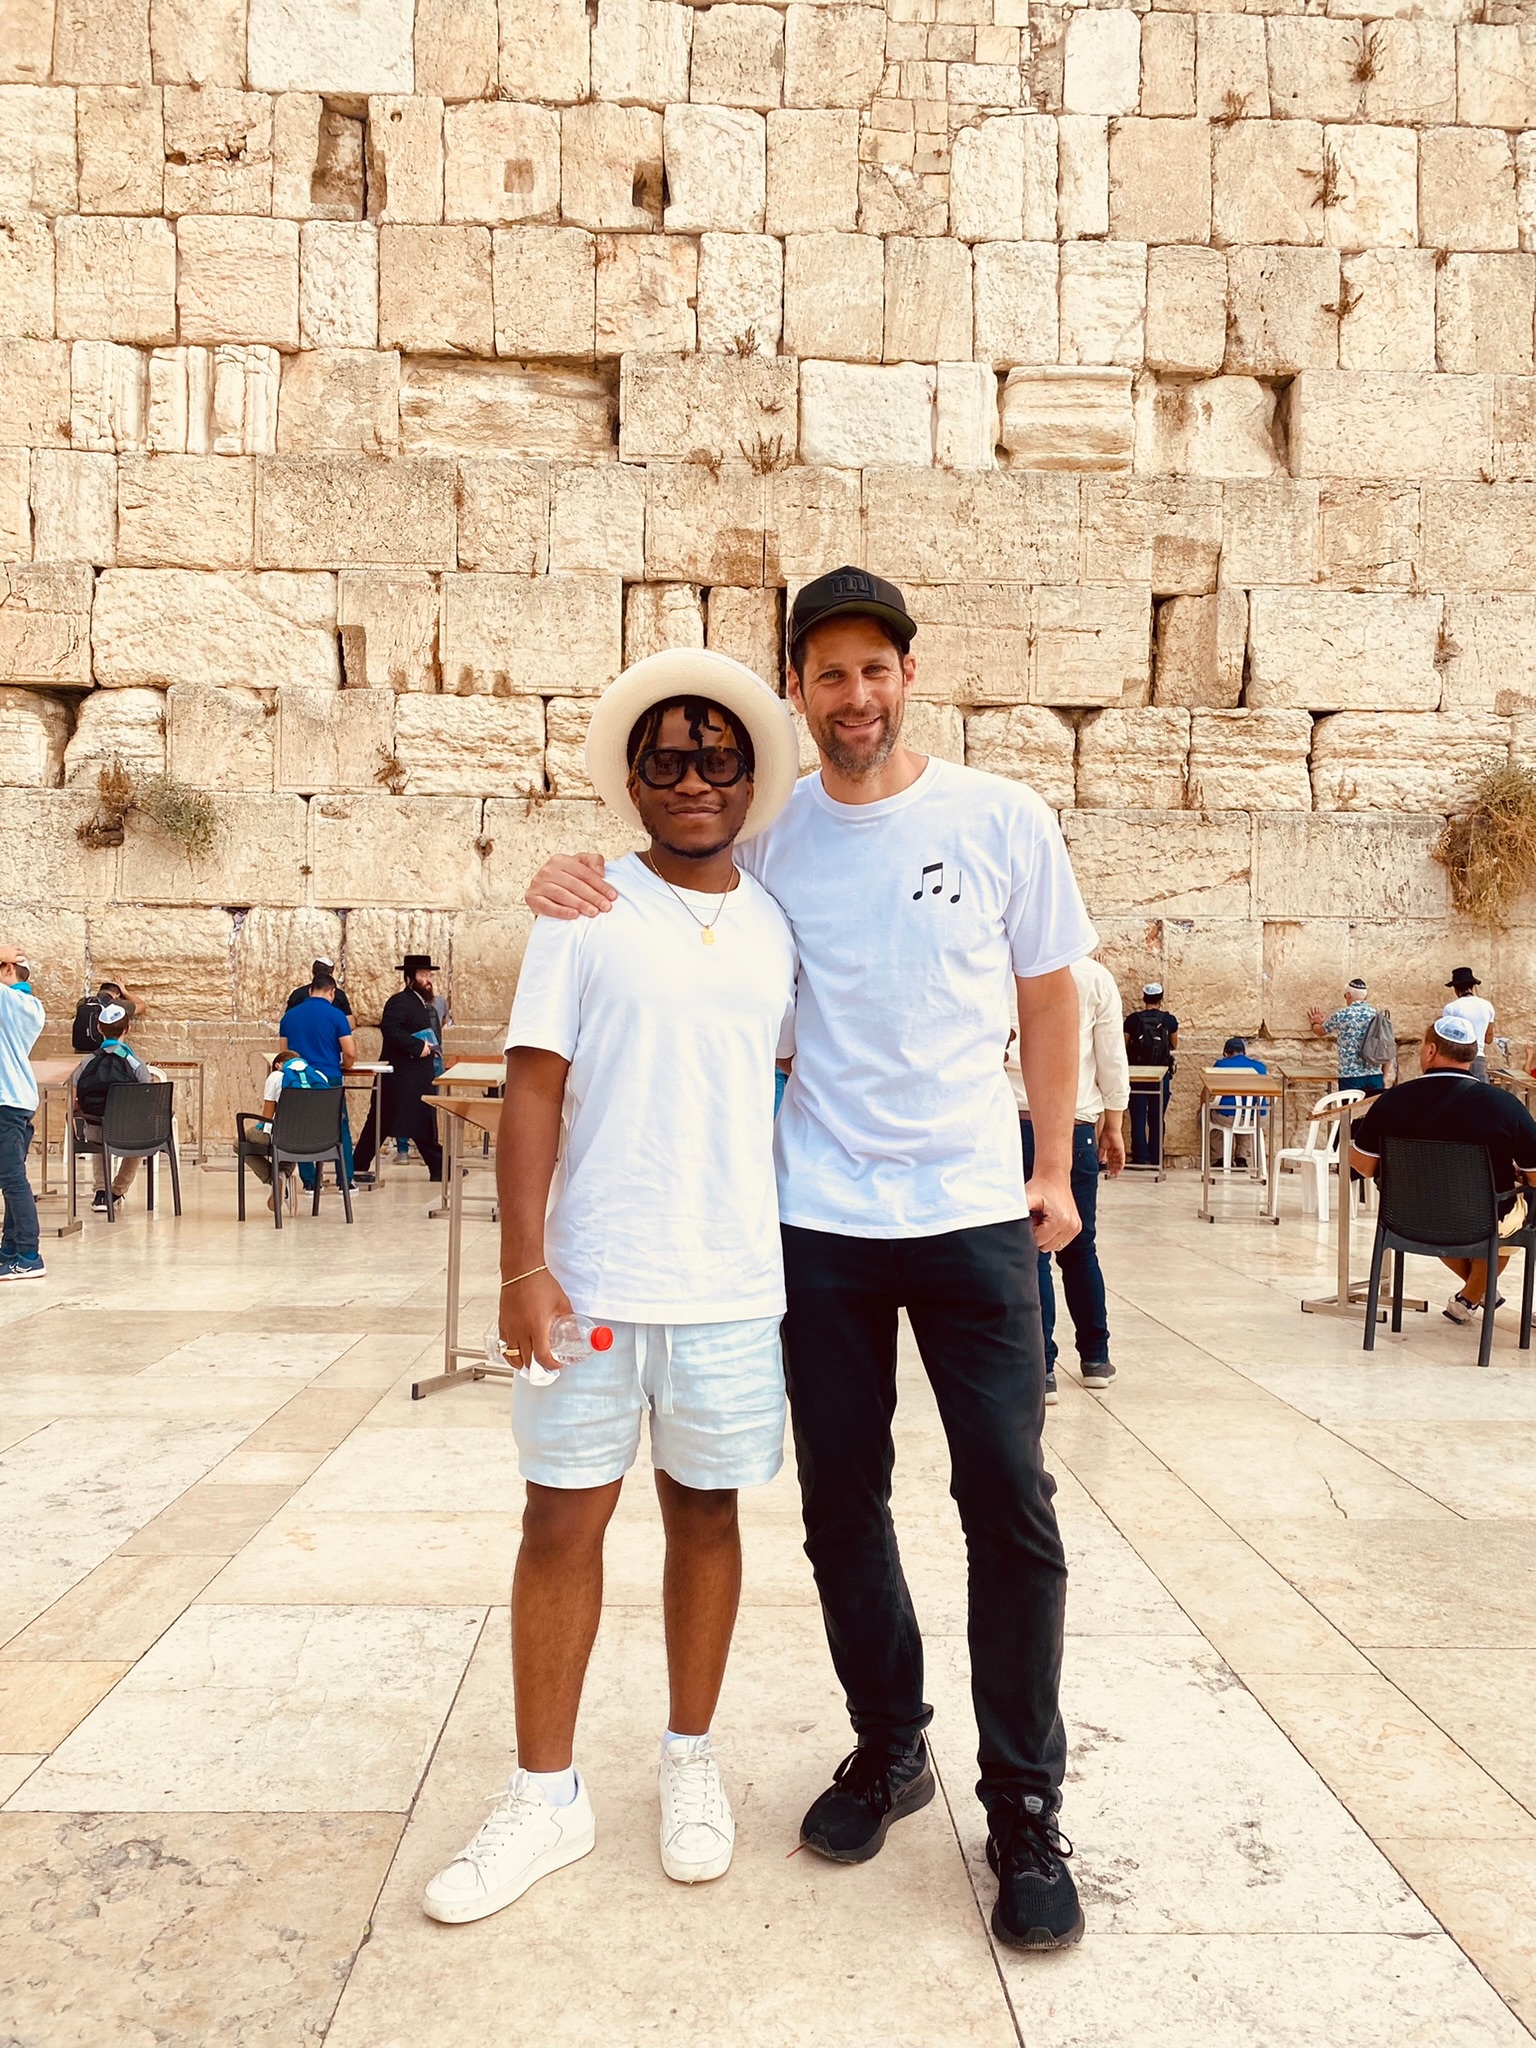 Leaders of the inaugural Let the Music Play mission to Israel, Markell Casey (left) and Dan Rosen, at the Western Wall in Jerusalem.